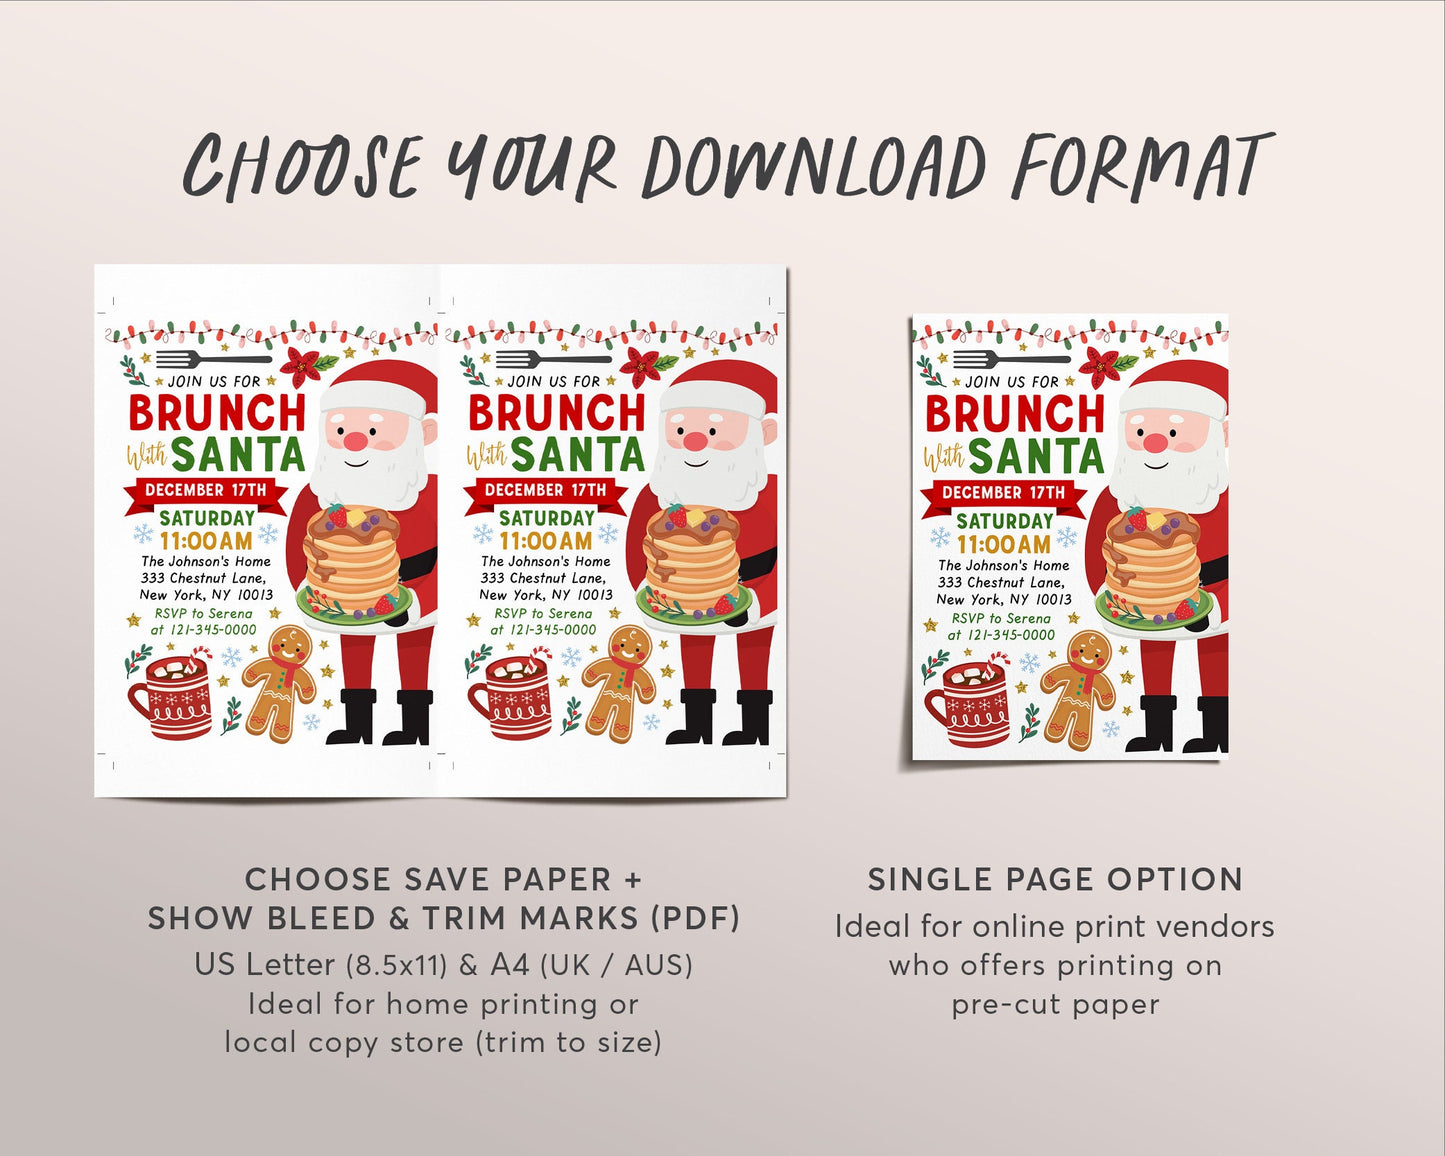 Brunch with Santa Invitation Editable Template, Christmas Party Invite Printable Evite, Holiday Pancakes Breakfast Hot Cocoa Chocolate